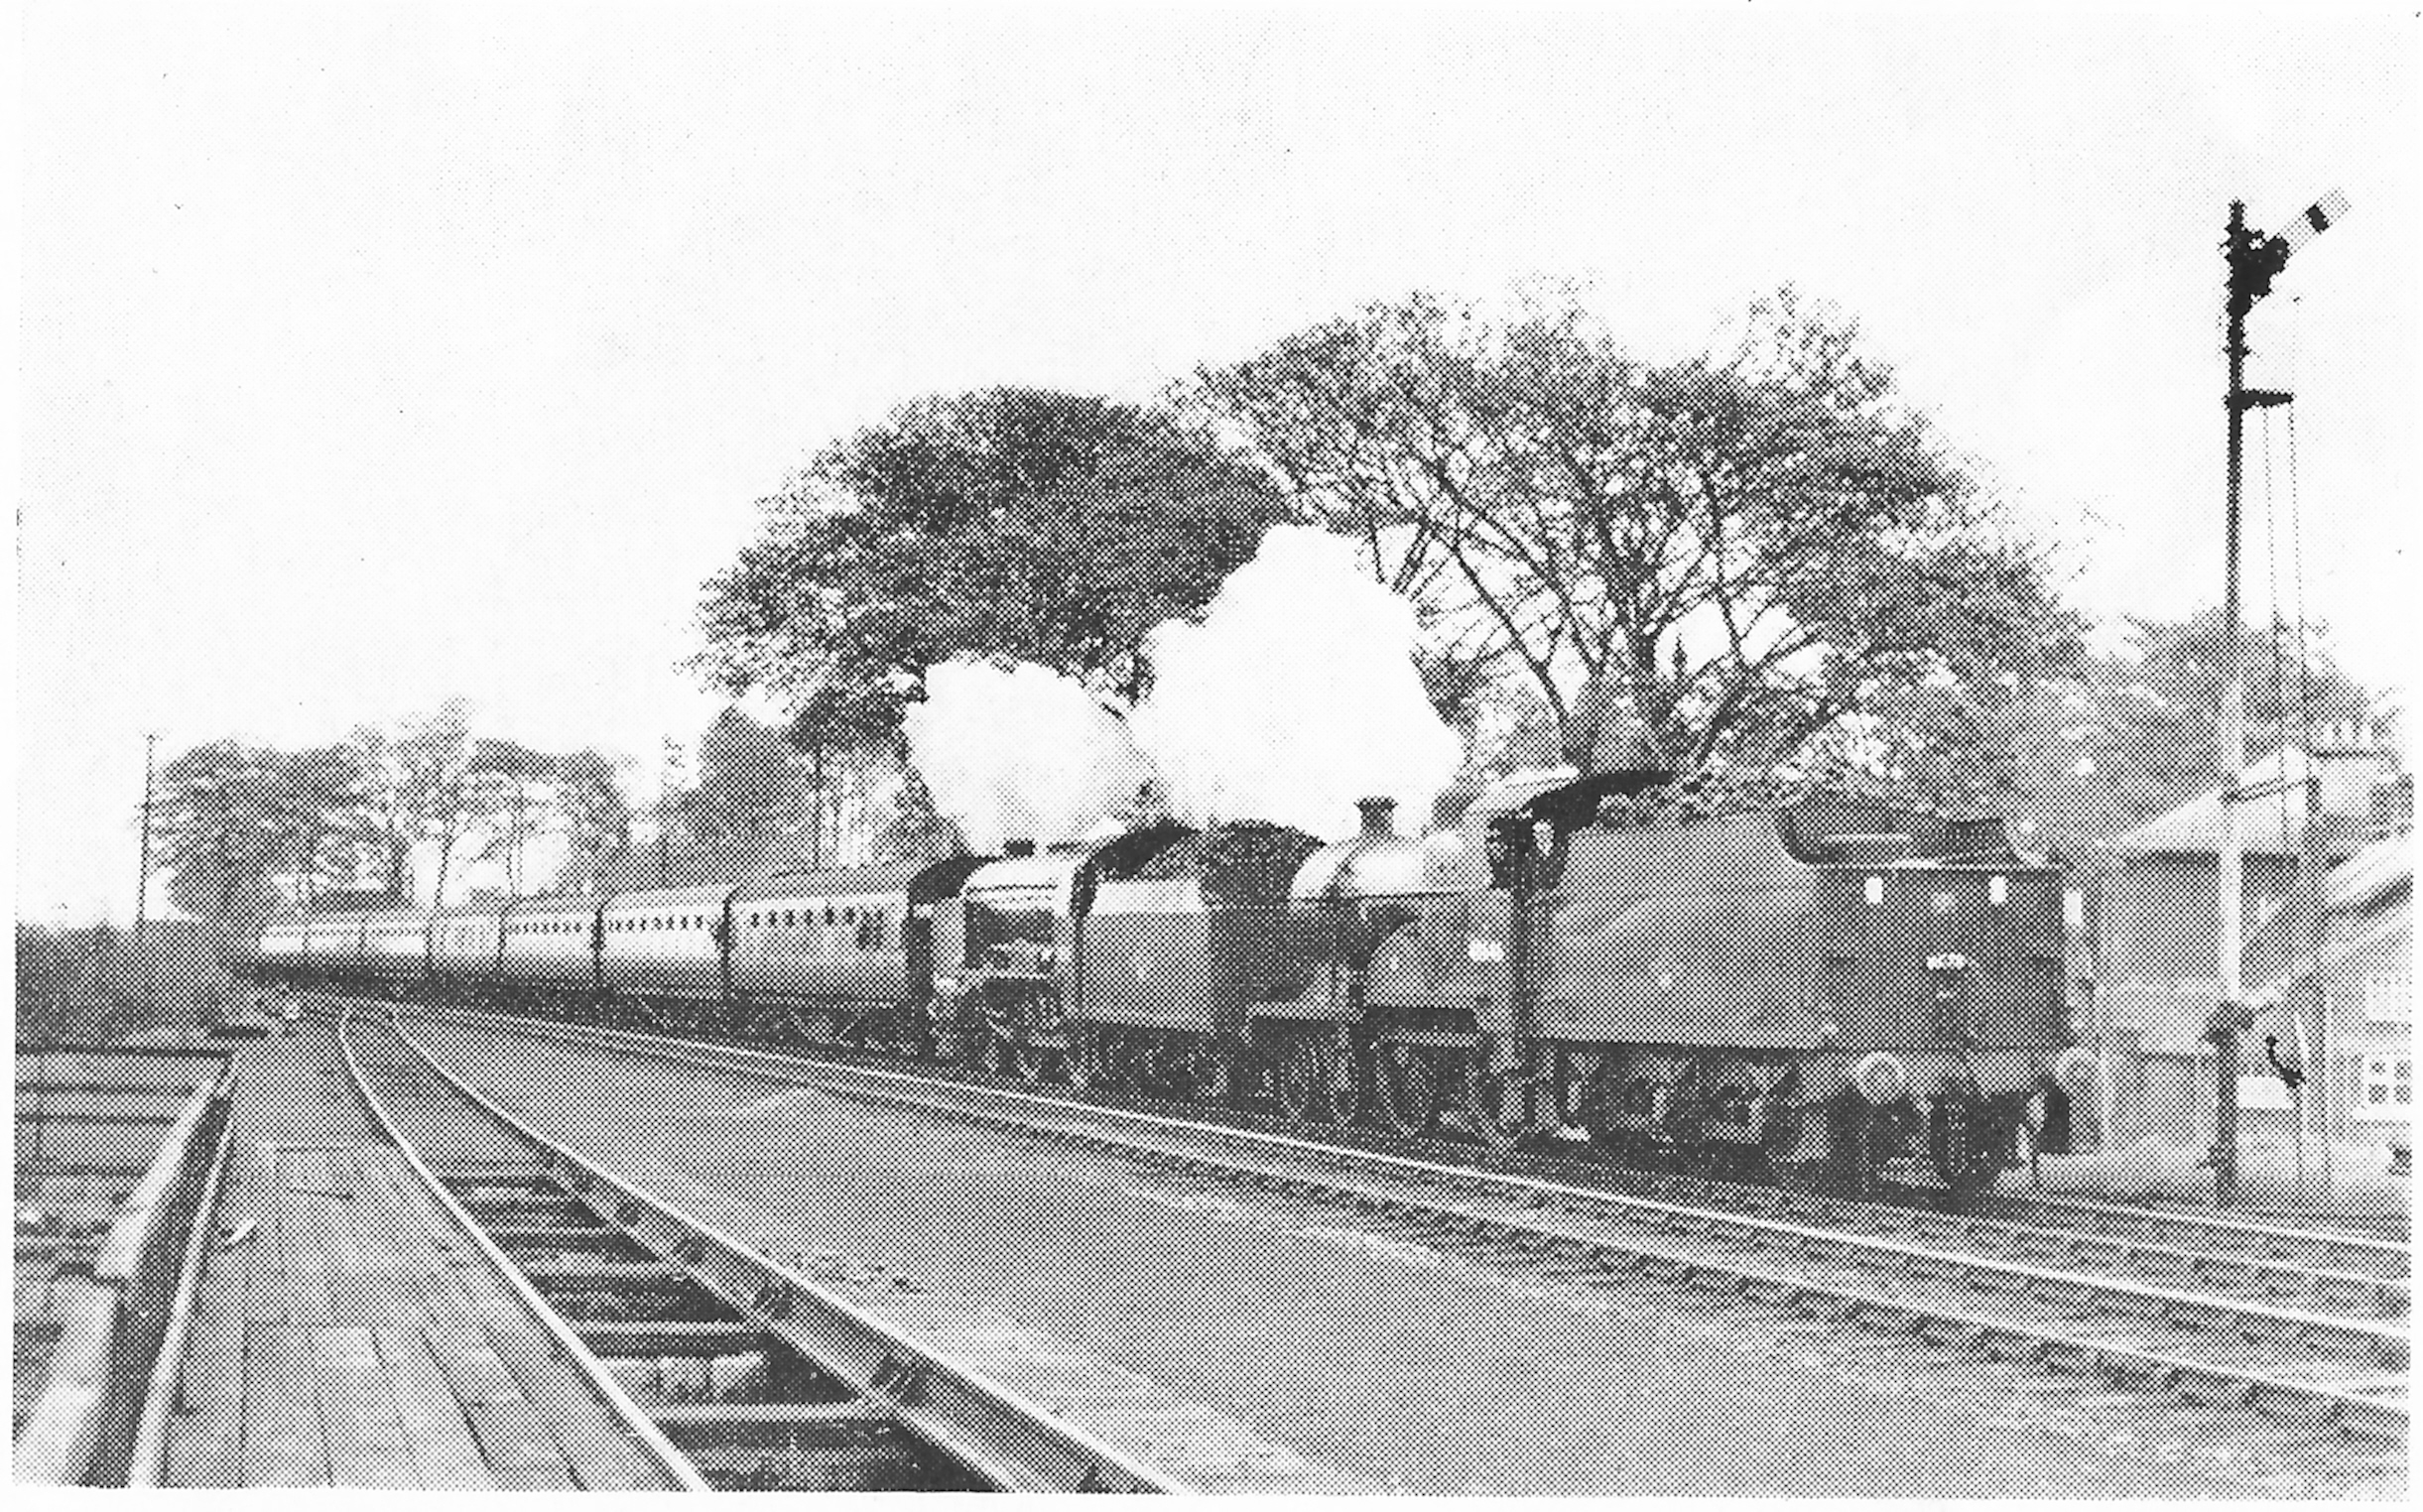 East Midlander No.5. 40646 and 30925 at Spofforth, running tender-first from Wetherby Town to Starbeck after traversing the Wetherby branch, 13th May 1962. R. Leslie
Scanned from July 1962 RO.